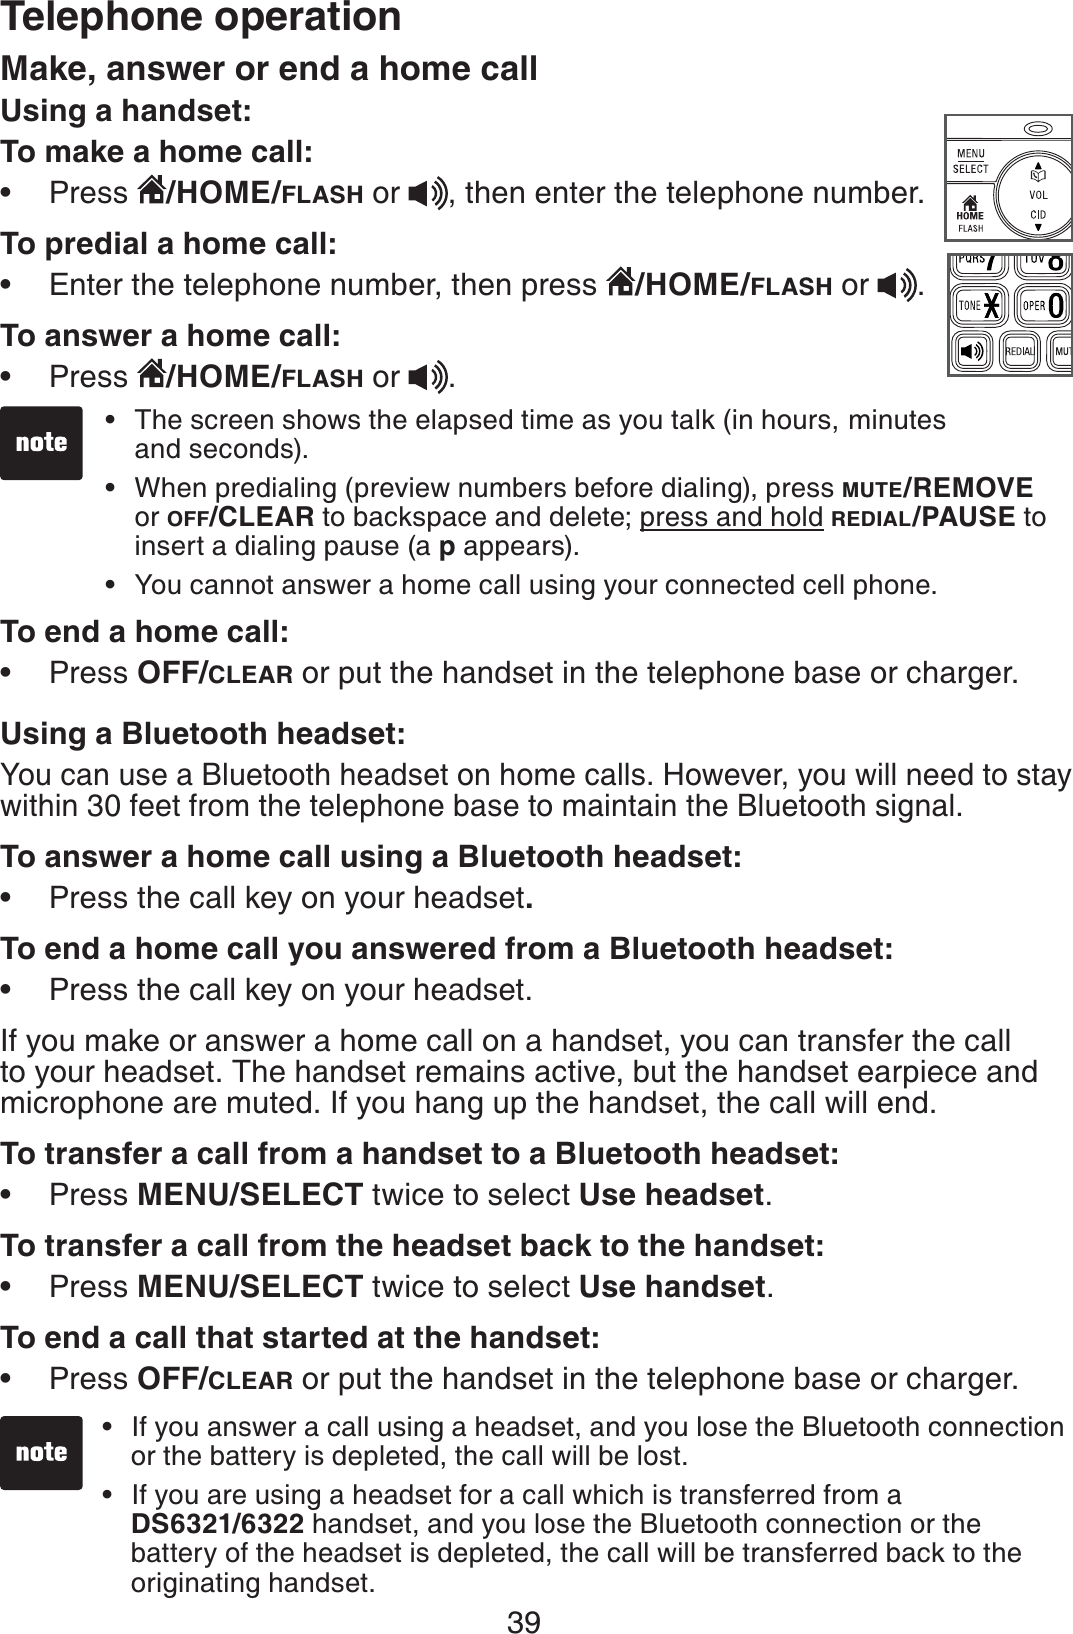 39Make, answer or end a home call Using a handset:To make a home call:Press  /HOME/FLASH or  , then enter the telephone number.To predial a home call:Enter the telephone number, then press  /HOME/FLASH or  .To answer a home call:Press  /HOME/FLASH or  .To end a home call:Press OFF/CLEAR or put the handset in the telephone base or charger.Using a Bluetooth headset:You can use a Bluetooth headset on home calls. However, you will need to stay within 30 feet from the telephone base to maintain the Bluetooth signal.To answer a home call using a Bluetooth headset:Press the call key on your headset.To end a home call you answered from a Bluetooth headset:Press the call key on your headset.If you make or answer a home call on a handset, you can transfer the call to your headset. The handset remains active, but the handset earpiece and microphone are muted. If you hang up the handset, the call will end.To transfer a call from a handset to a Bluetooth headset:Press MENU/SELECT twice to select Use headset.To transfer a call from the headset back to the handset:Press MENU/SELECT twice to select Use handset.To end a call that started at the handset:Press OFF/CLEAR or put the handset in the telephone base or charger.•••••••••The screen shows the elapsed time as you talk (in hours, minutes and seconds).When predialing (preview numbers before dialing), press MUTE/REMOVEor OFF/CLEAR to backspace and delete; press and hold REDIAL/PAUSE to insert a dialing pause (a p appears).You cannot answer a home call using your connected cell phone.•••Telephone operationIf you answer a call using a headset, and you lose the Bluetooth connection or the battery is depleted, the call will be lost.If you are using a headset for a call which is transferred from a    DS6321/6322 handset, and you lose the Bluetooth connection or the   battery of the headset is depleted, the call will be transferred back to the    originating handset. ••